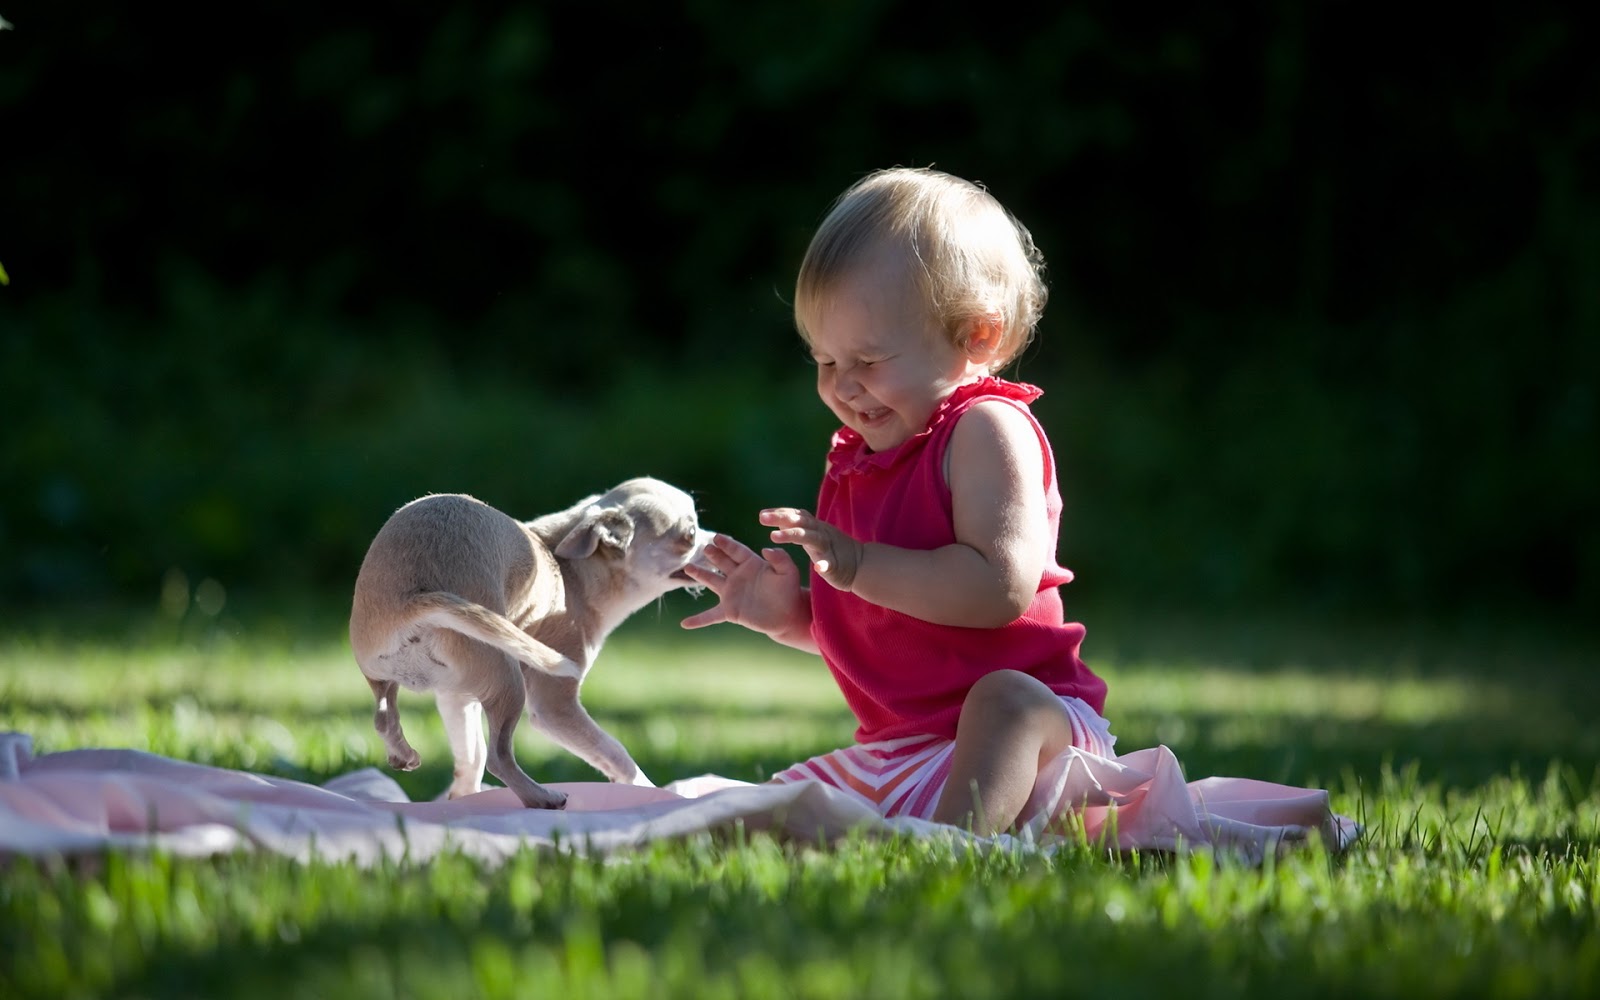 Cute+Baby+playing+with+pet+image